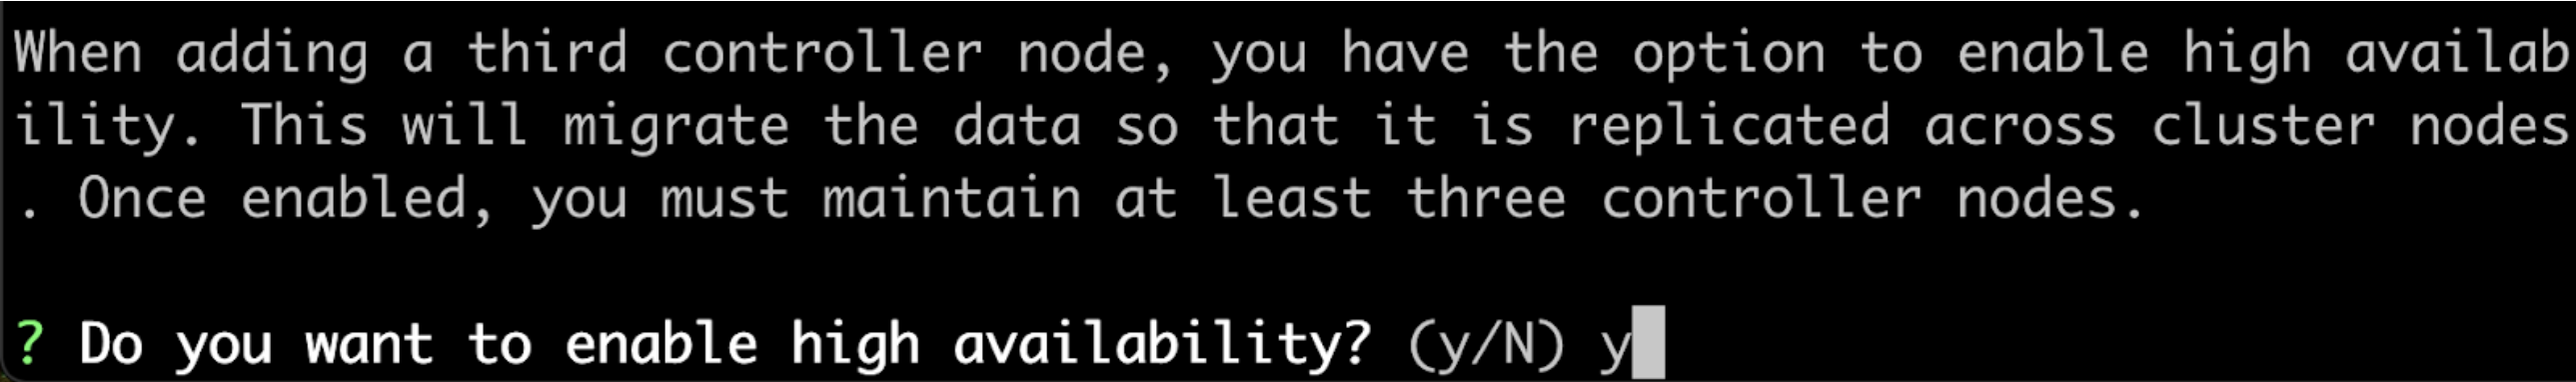 high availability command line prompt